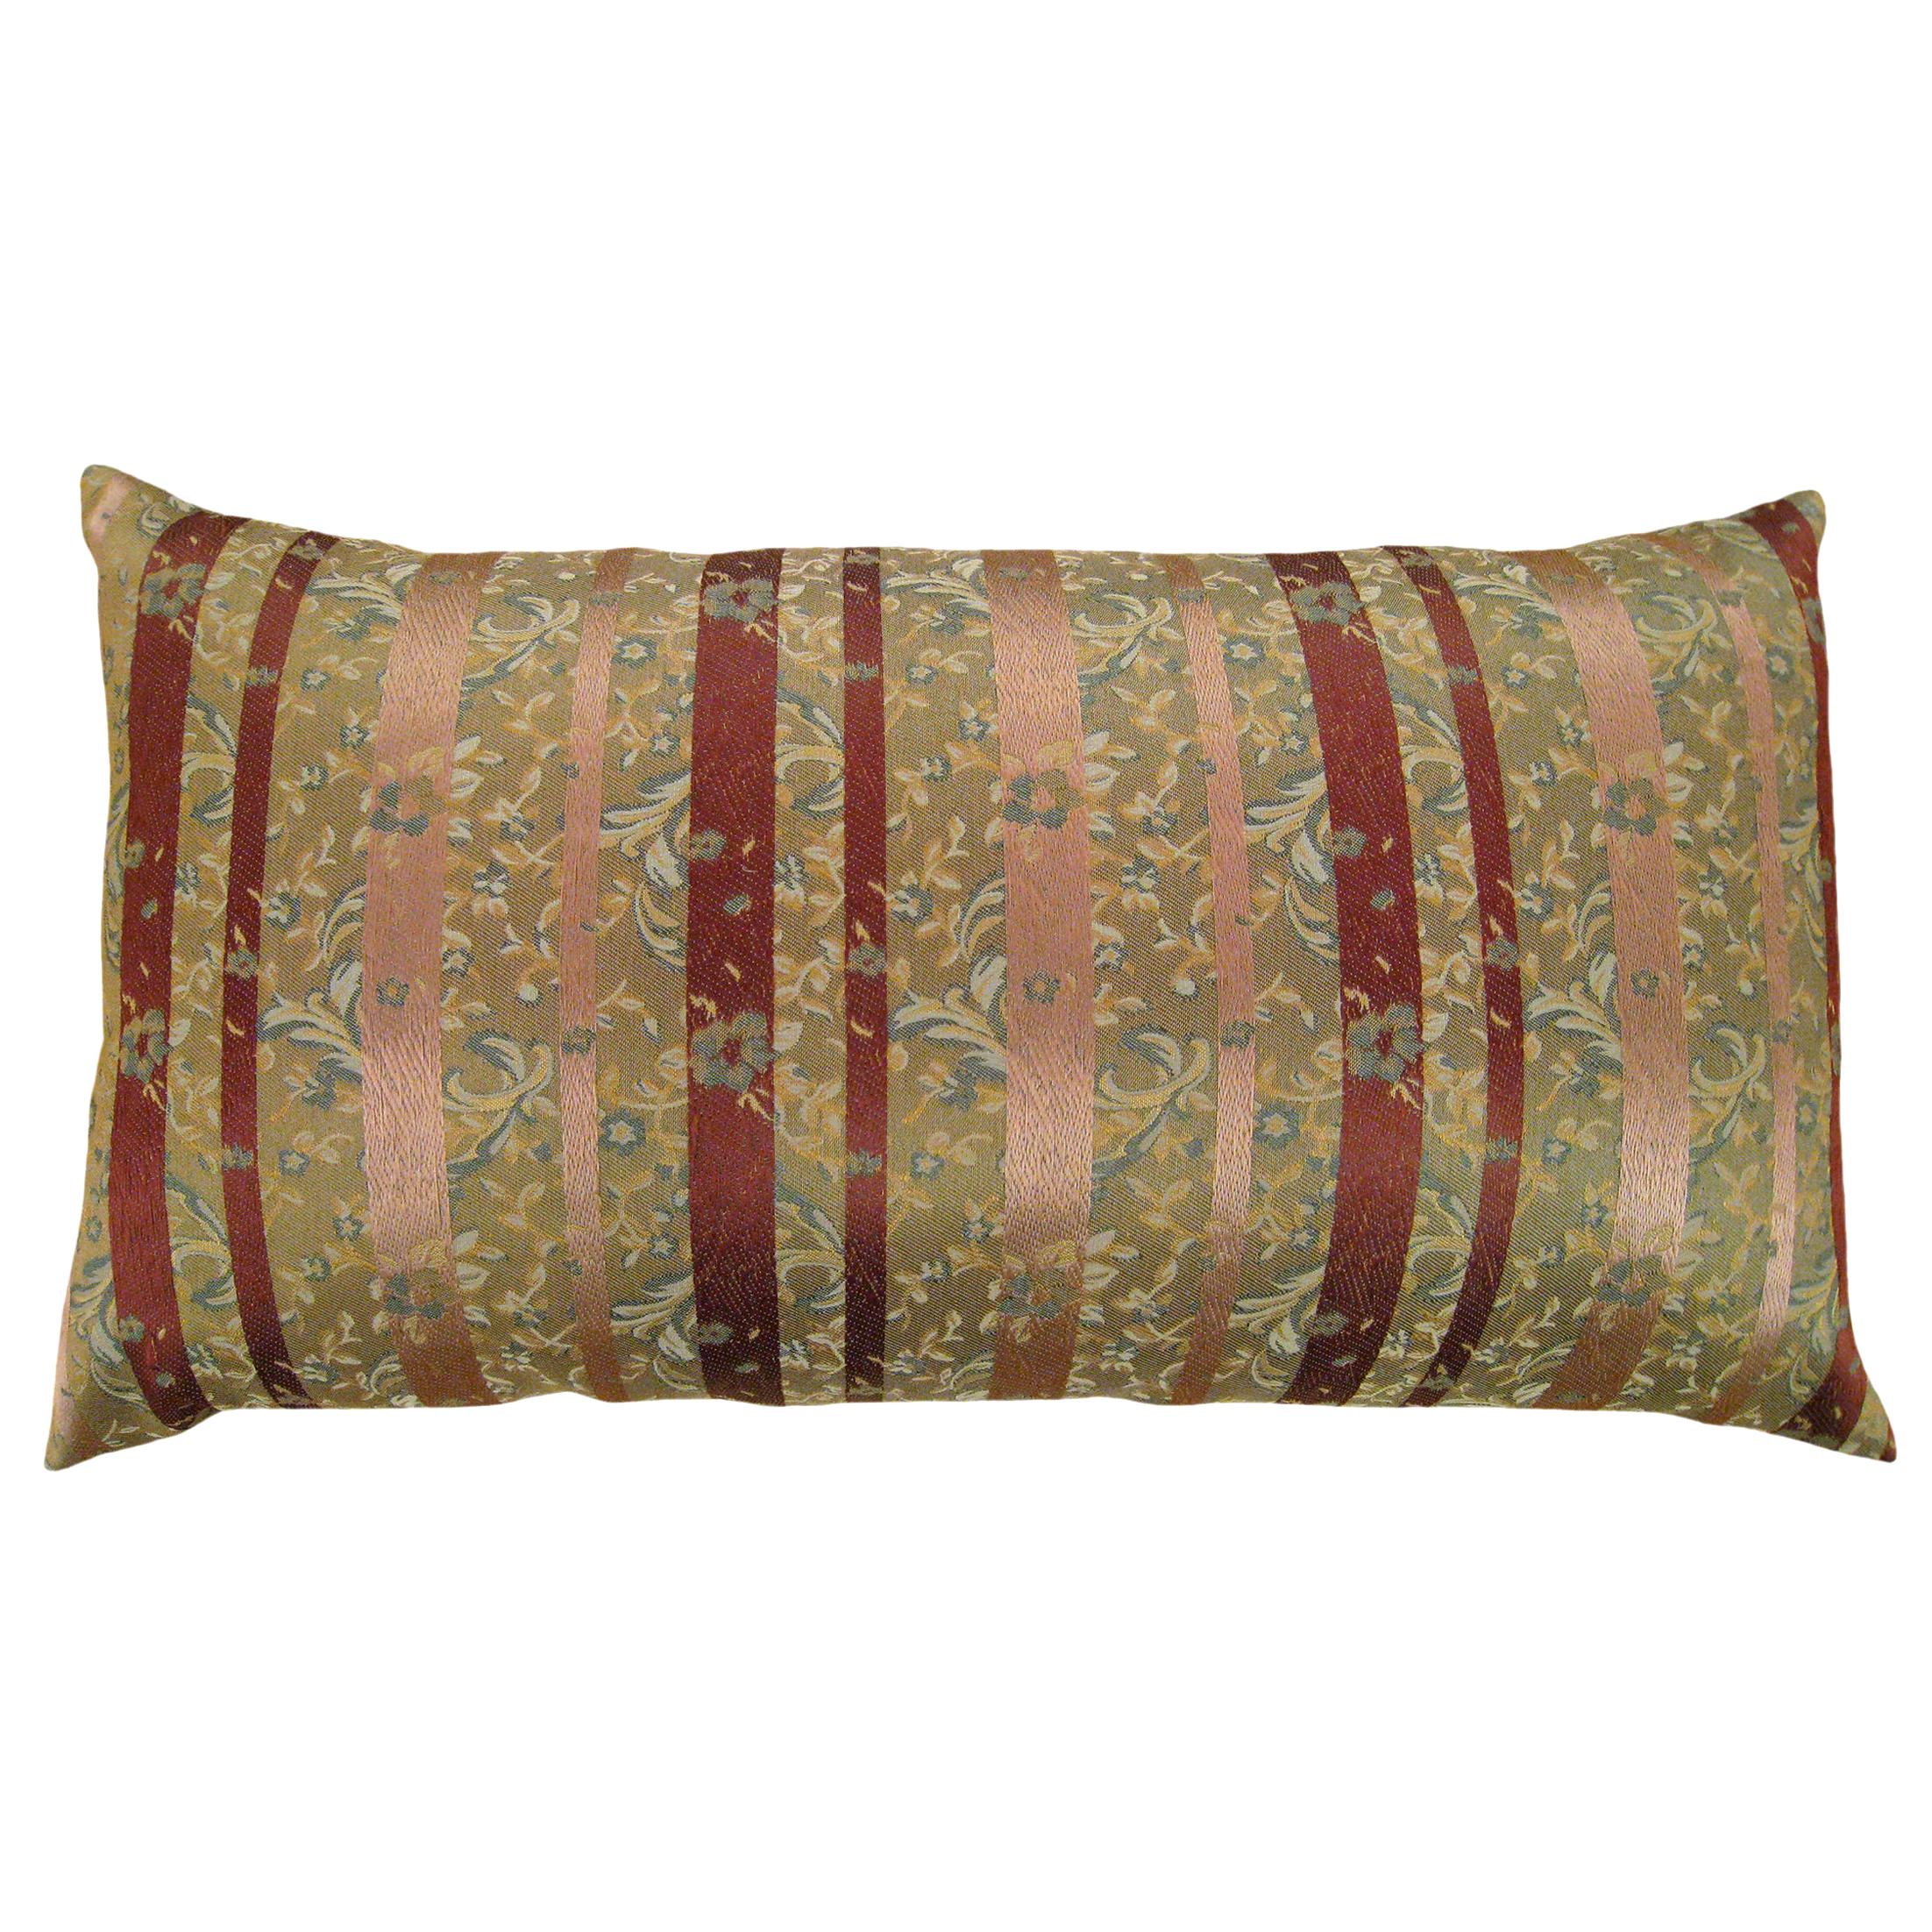 Vintage Decorative Chinoiserie Brocade Pillow with Stripes